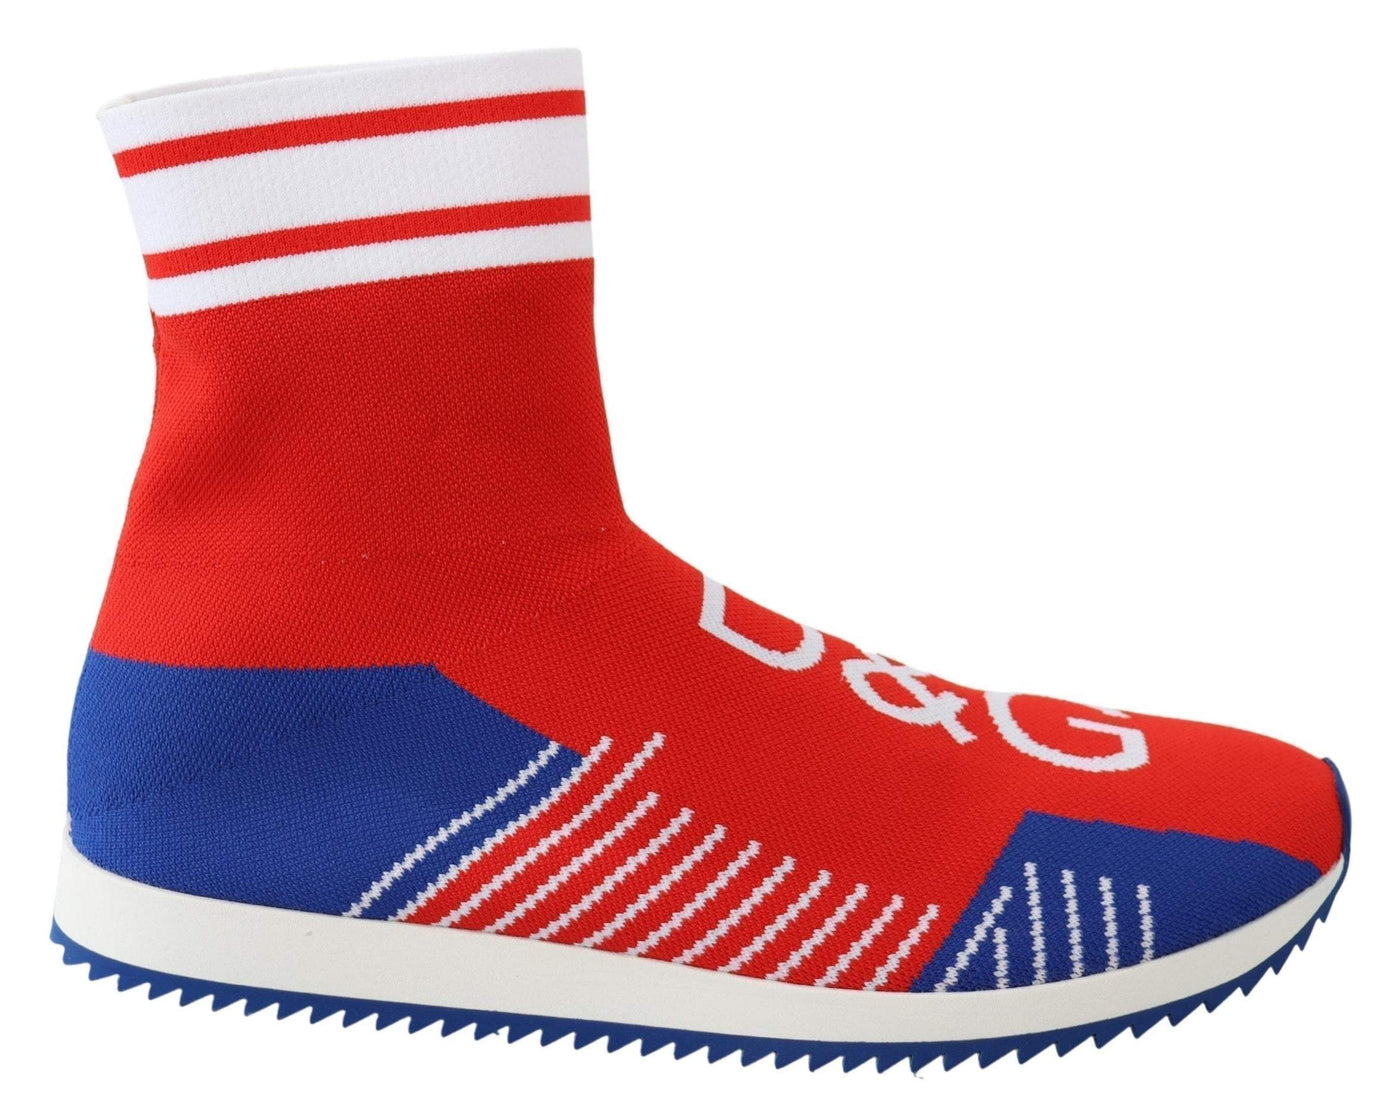 Dolce & Gabbana Blue Red Sorrento Logo Sneakers Socks Shoes #men, Dolce & Gabbana, EU39.5/US6.5, EU39/US6, EU40.5/US7.5, EU40/US7, EU41.5/US8.5, EU41/US8, EU42.5/US9.5, EU42/US9, EU43.5/US10.5, EU43/US10, EU44/US11, feed-agegroup-adult, feed-color-Red, feed-gender-male, feed-size-US10, feed-size-US10.5, feed-size-US11, feed-size-US6, feed-size-US6.5, feed-size-US7, feed-size-US7.5, feed-size-US8, feed-size-US8.5, feed-size-US9, feed-size-US9.5, Red, Shoes - New Arrivals, Sneakers - Men - Shoes at SEYMAYKA